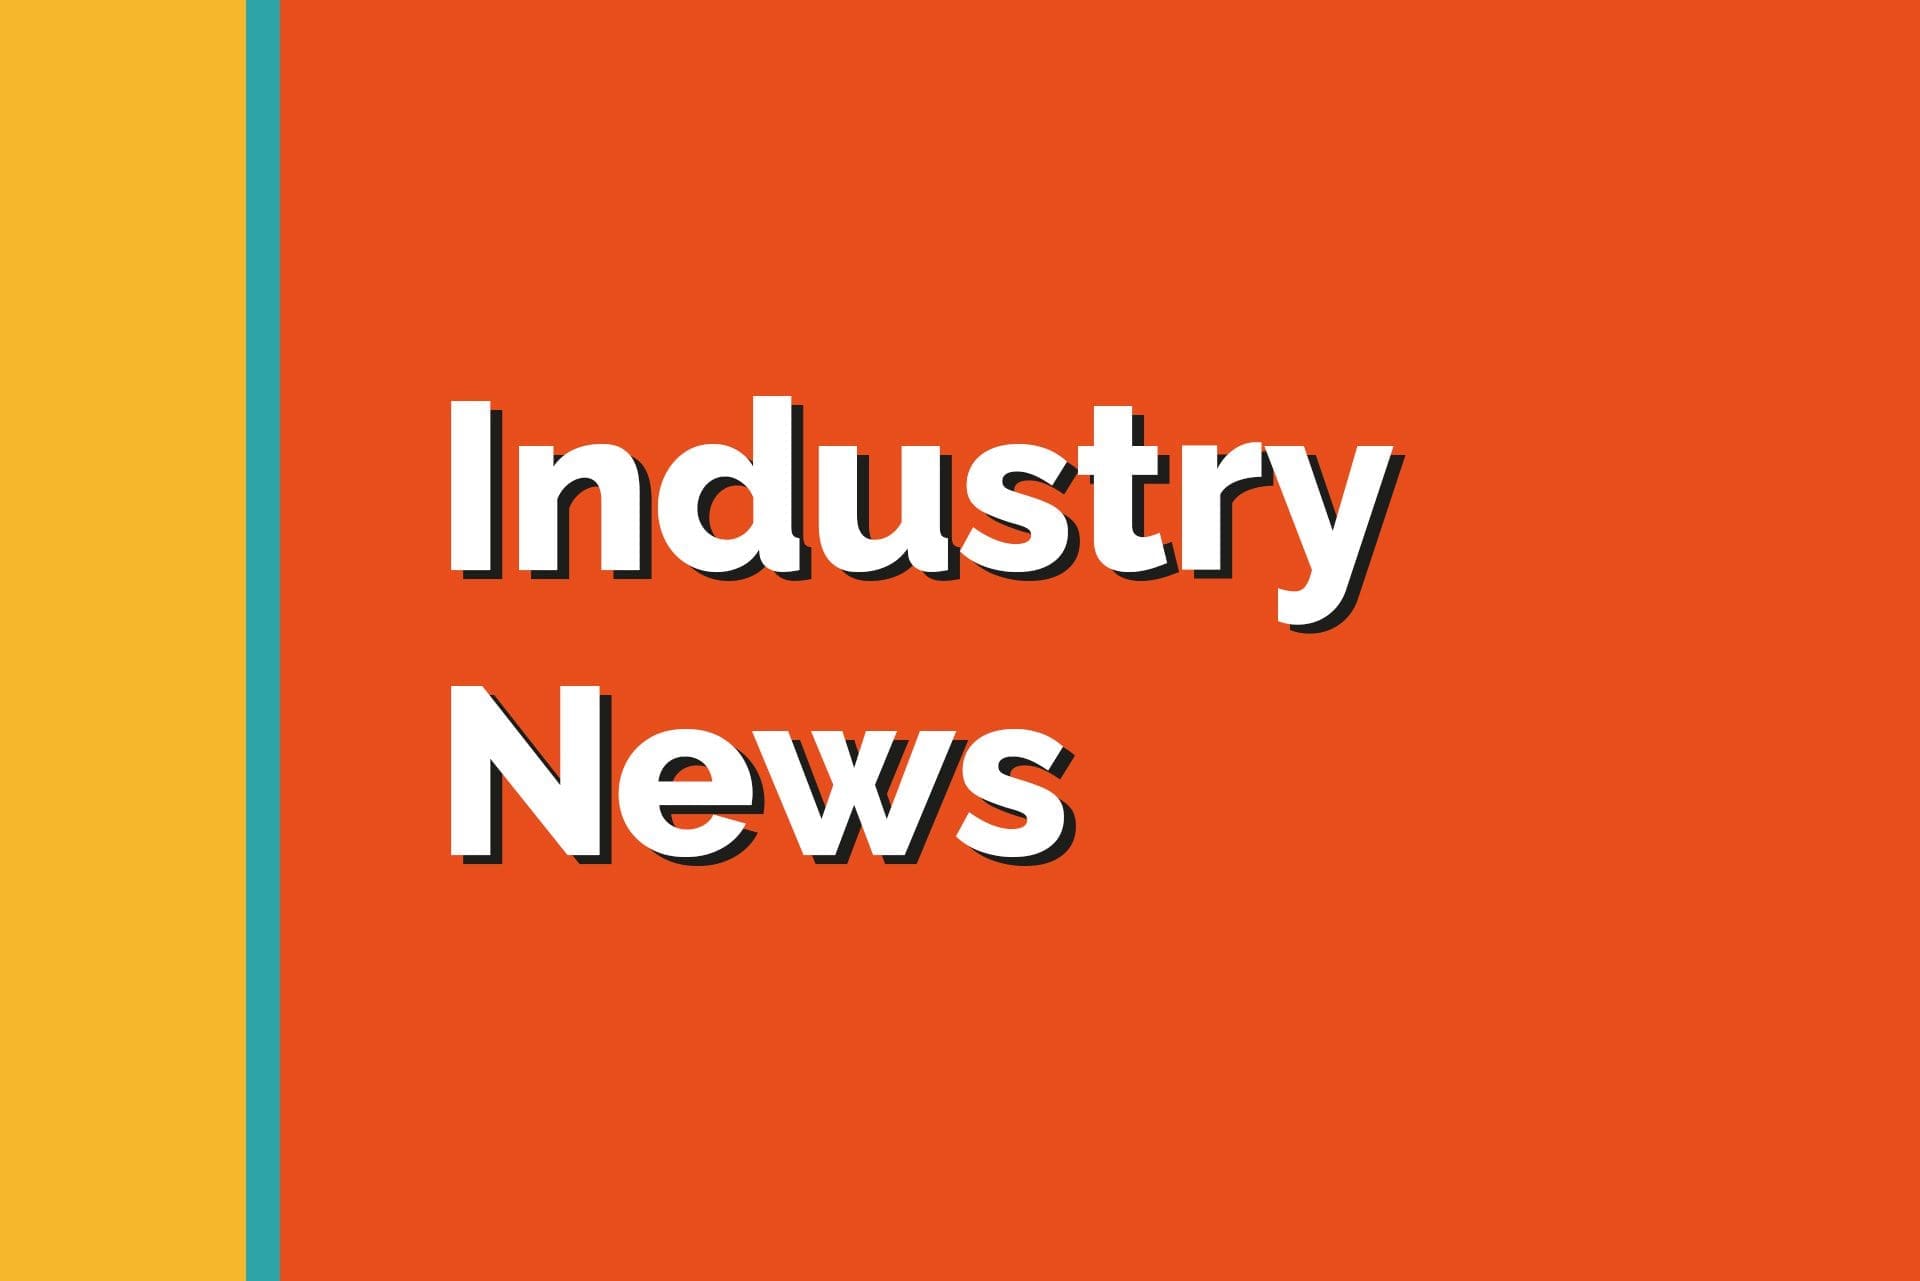 Industry New and Alerts from VOiD Applications